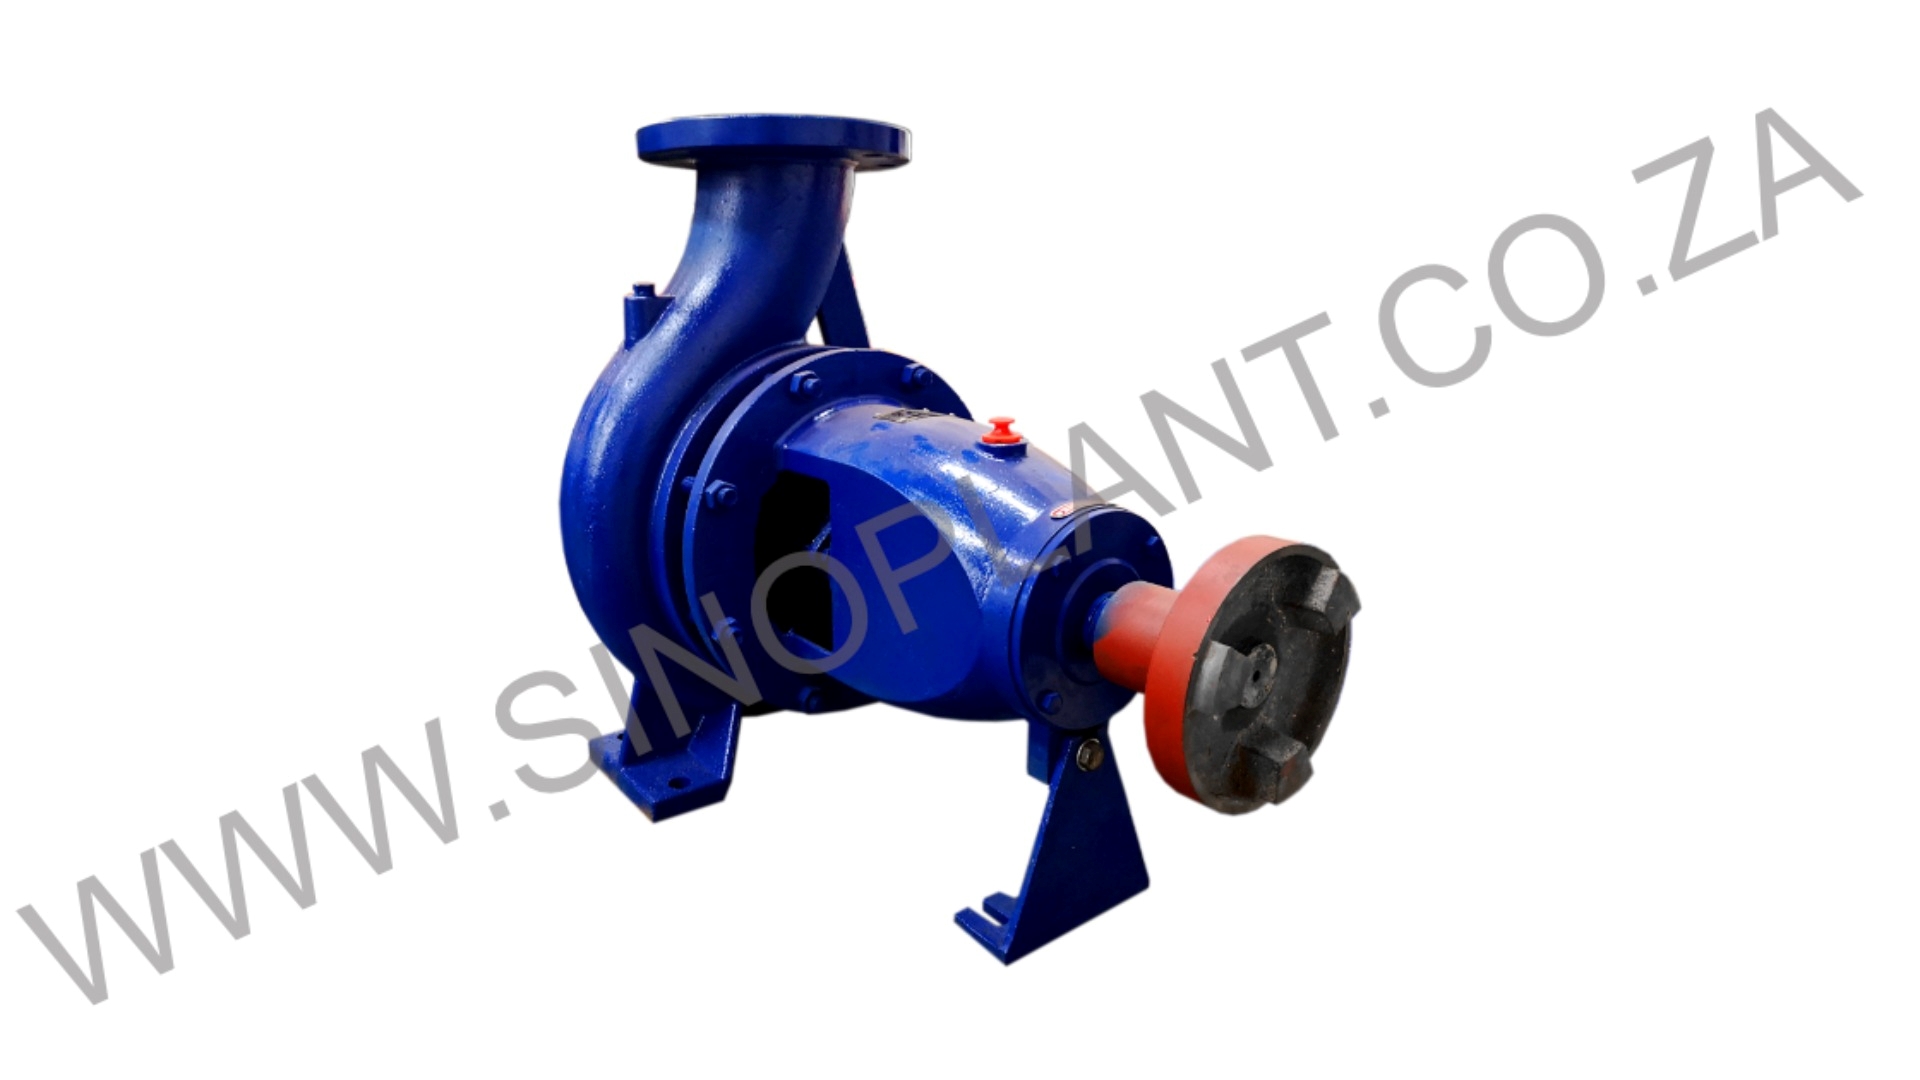 Sino Plant Water pumps 6" Water Pump Only 2022 for sale by Sino Plant | Truck & Trailer Marketplaces